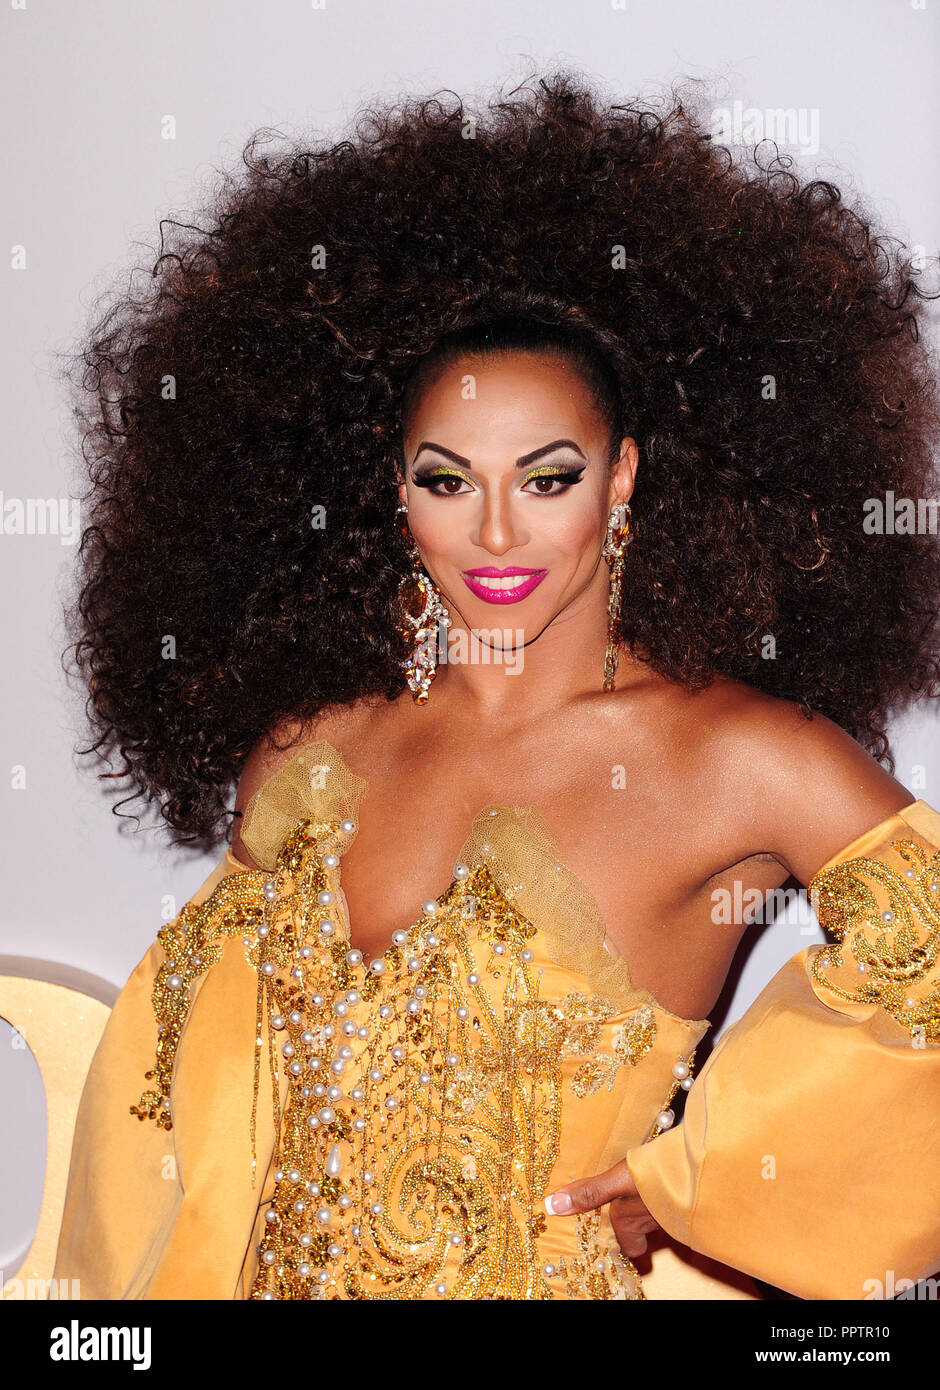 London, UK. 27th September, 2018. Shangela Laquifa Wadley attending A STAR is BORN - UK Premiere at the VUE West End ll London Thursday 27th September 2018. Credit: Peter Phillips/Alamy Live News Stock Photo